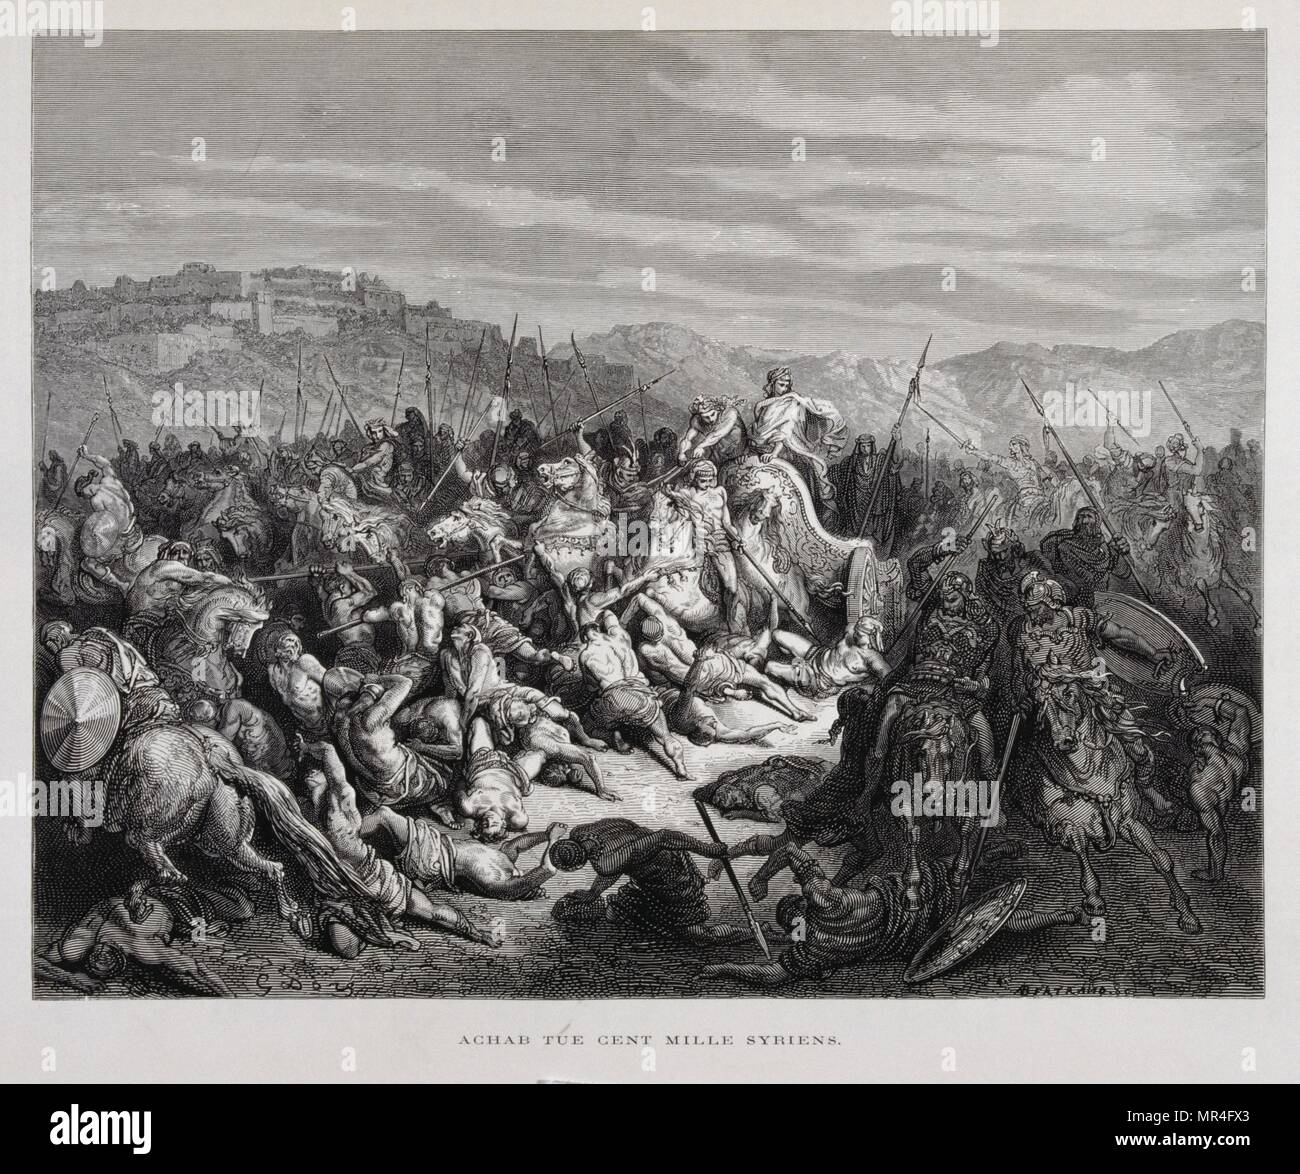 Ahab fights the Assyrians at the Battle of Qarqar , Illustration from the Dore Bible 1866. In 1866, the French artist and illustrator Gustave Doré (1832–1883), published a series of 241 wood engravings for a new deluxe edition of the 1843 French translation of the Vulgate Bible, popularly known as the Bible de Tours. This new edition was known as La Grande Bible de Tours and its illustrations were immensely successful. Ahab became king of Israel in the thirty-eighth year of Asa, king of Judah, and reigned for twenty-two years, Stock Photo